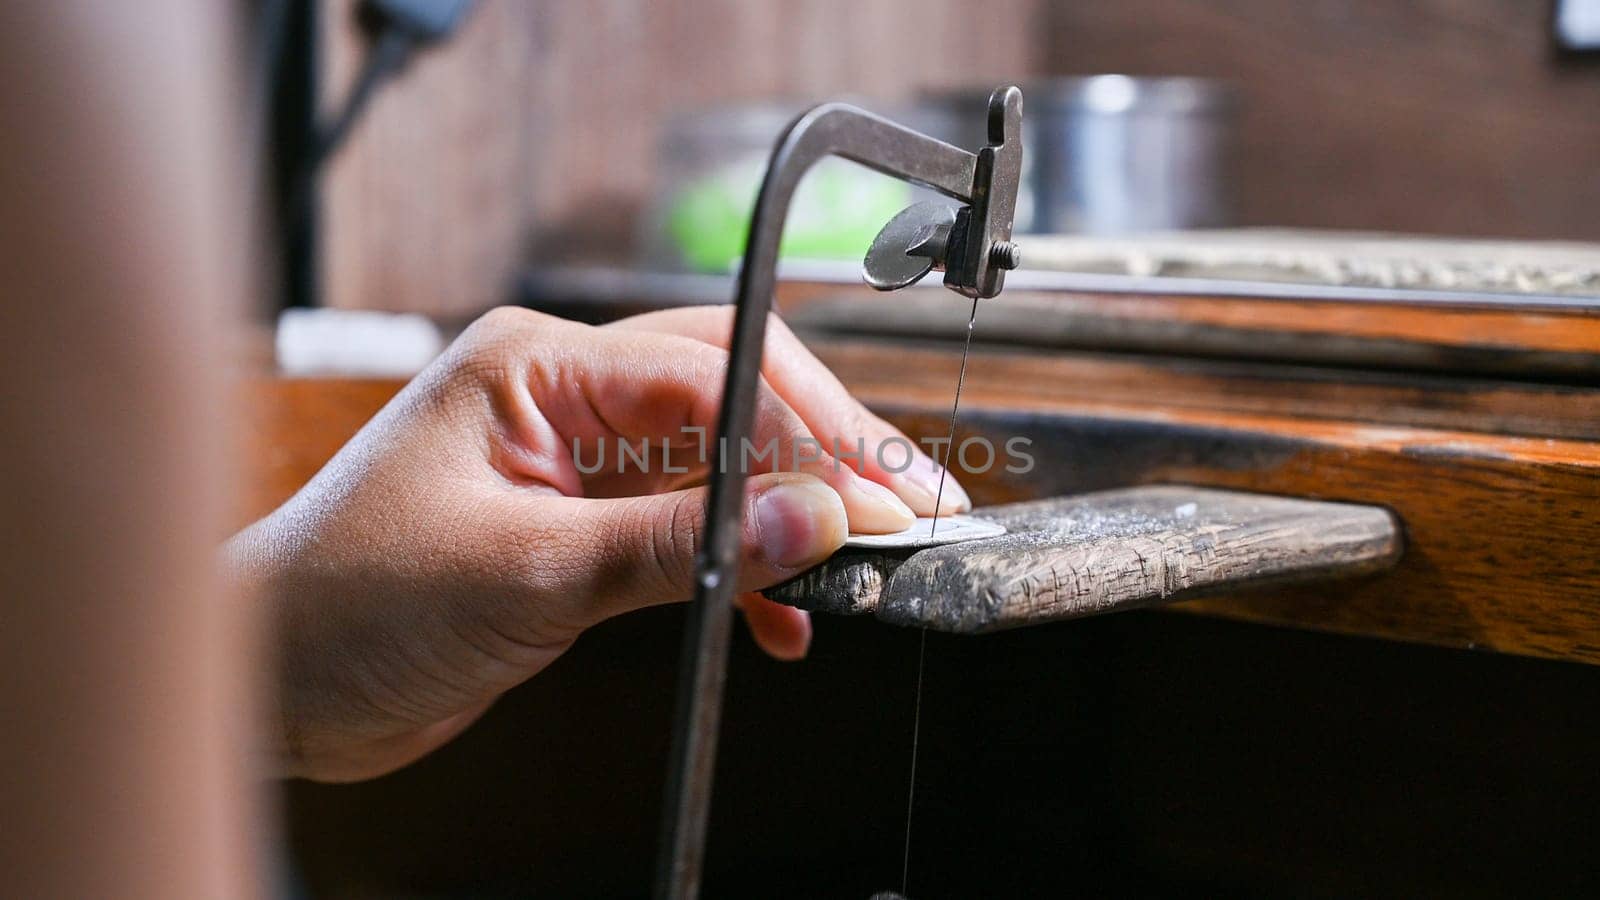 Artisan's hands meticulously shaping a piece of jewelry with tools